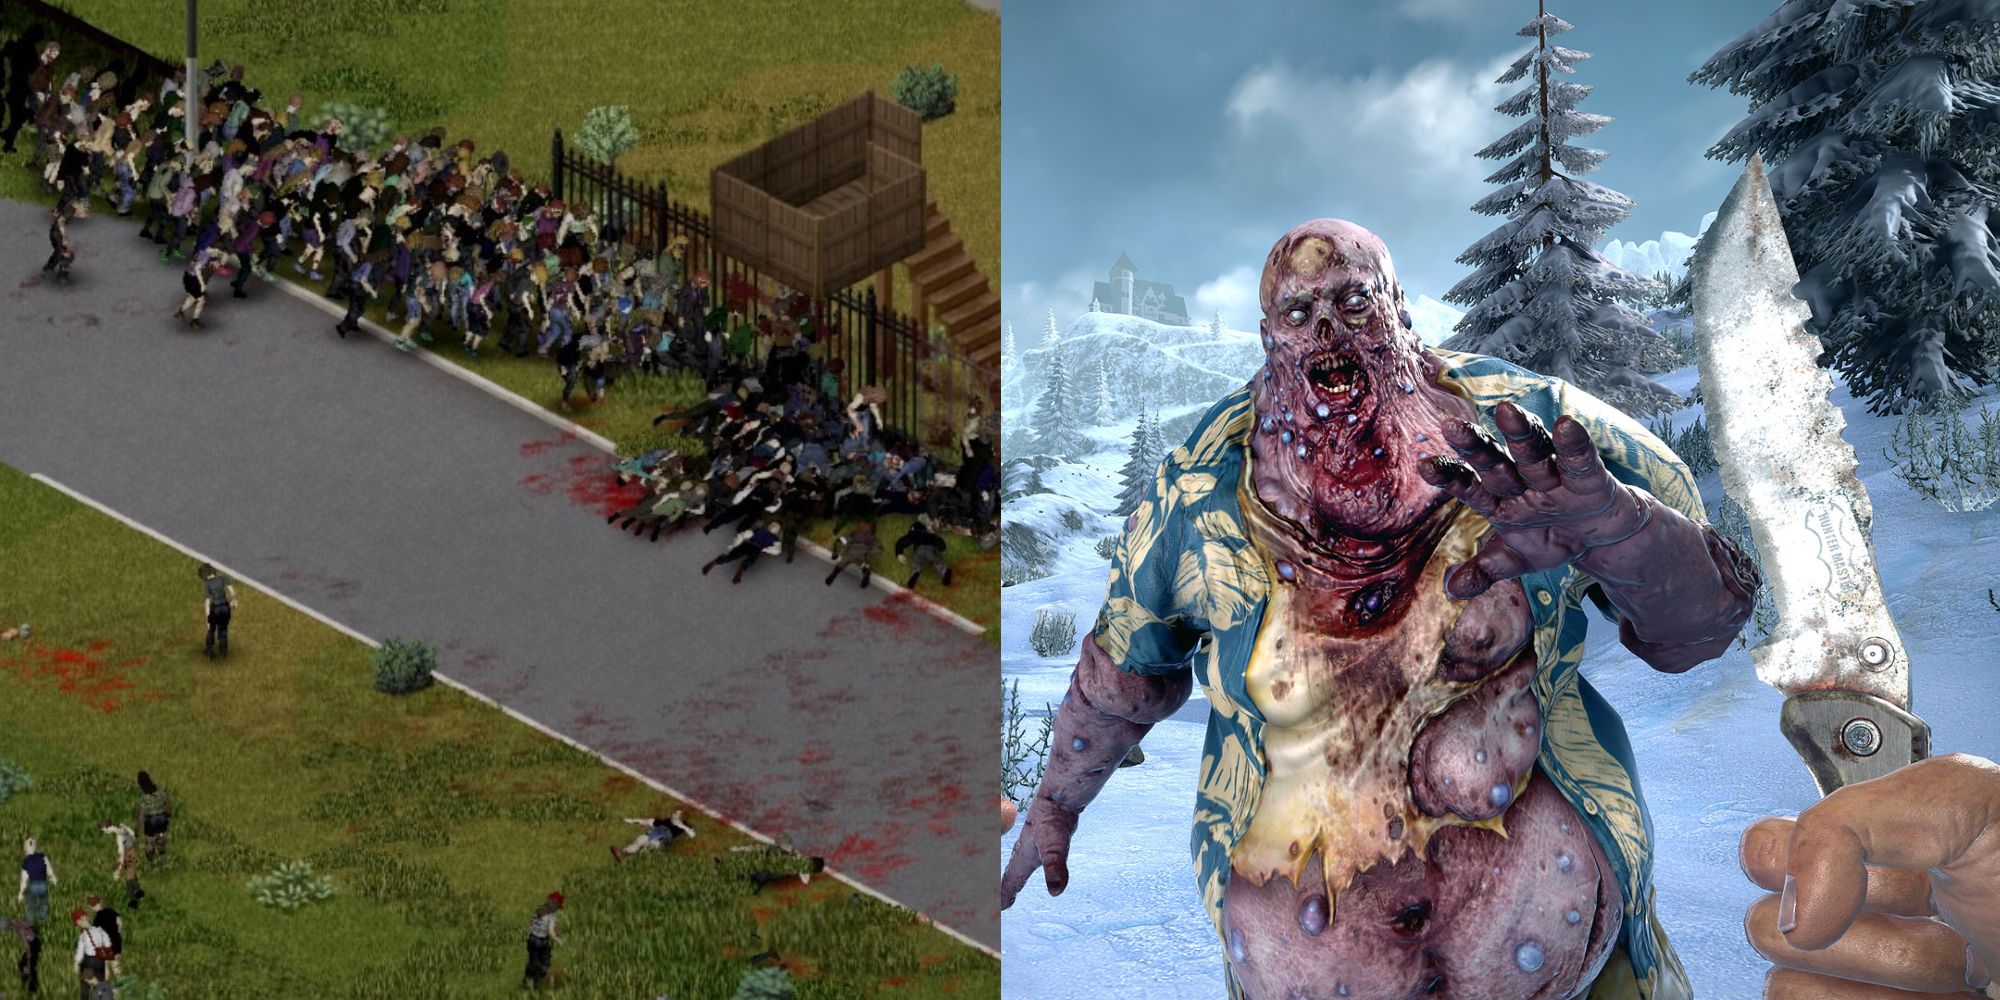 horde in project Zomboid next to bloater from 7 days to die